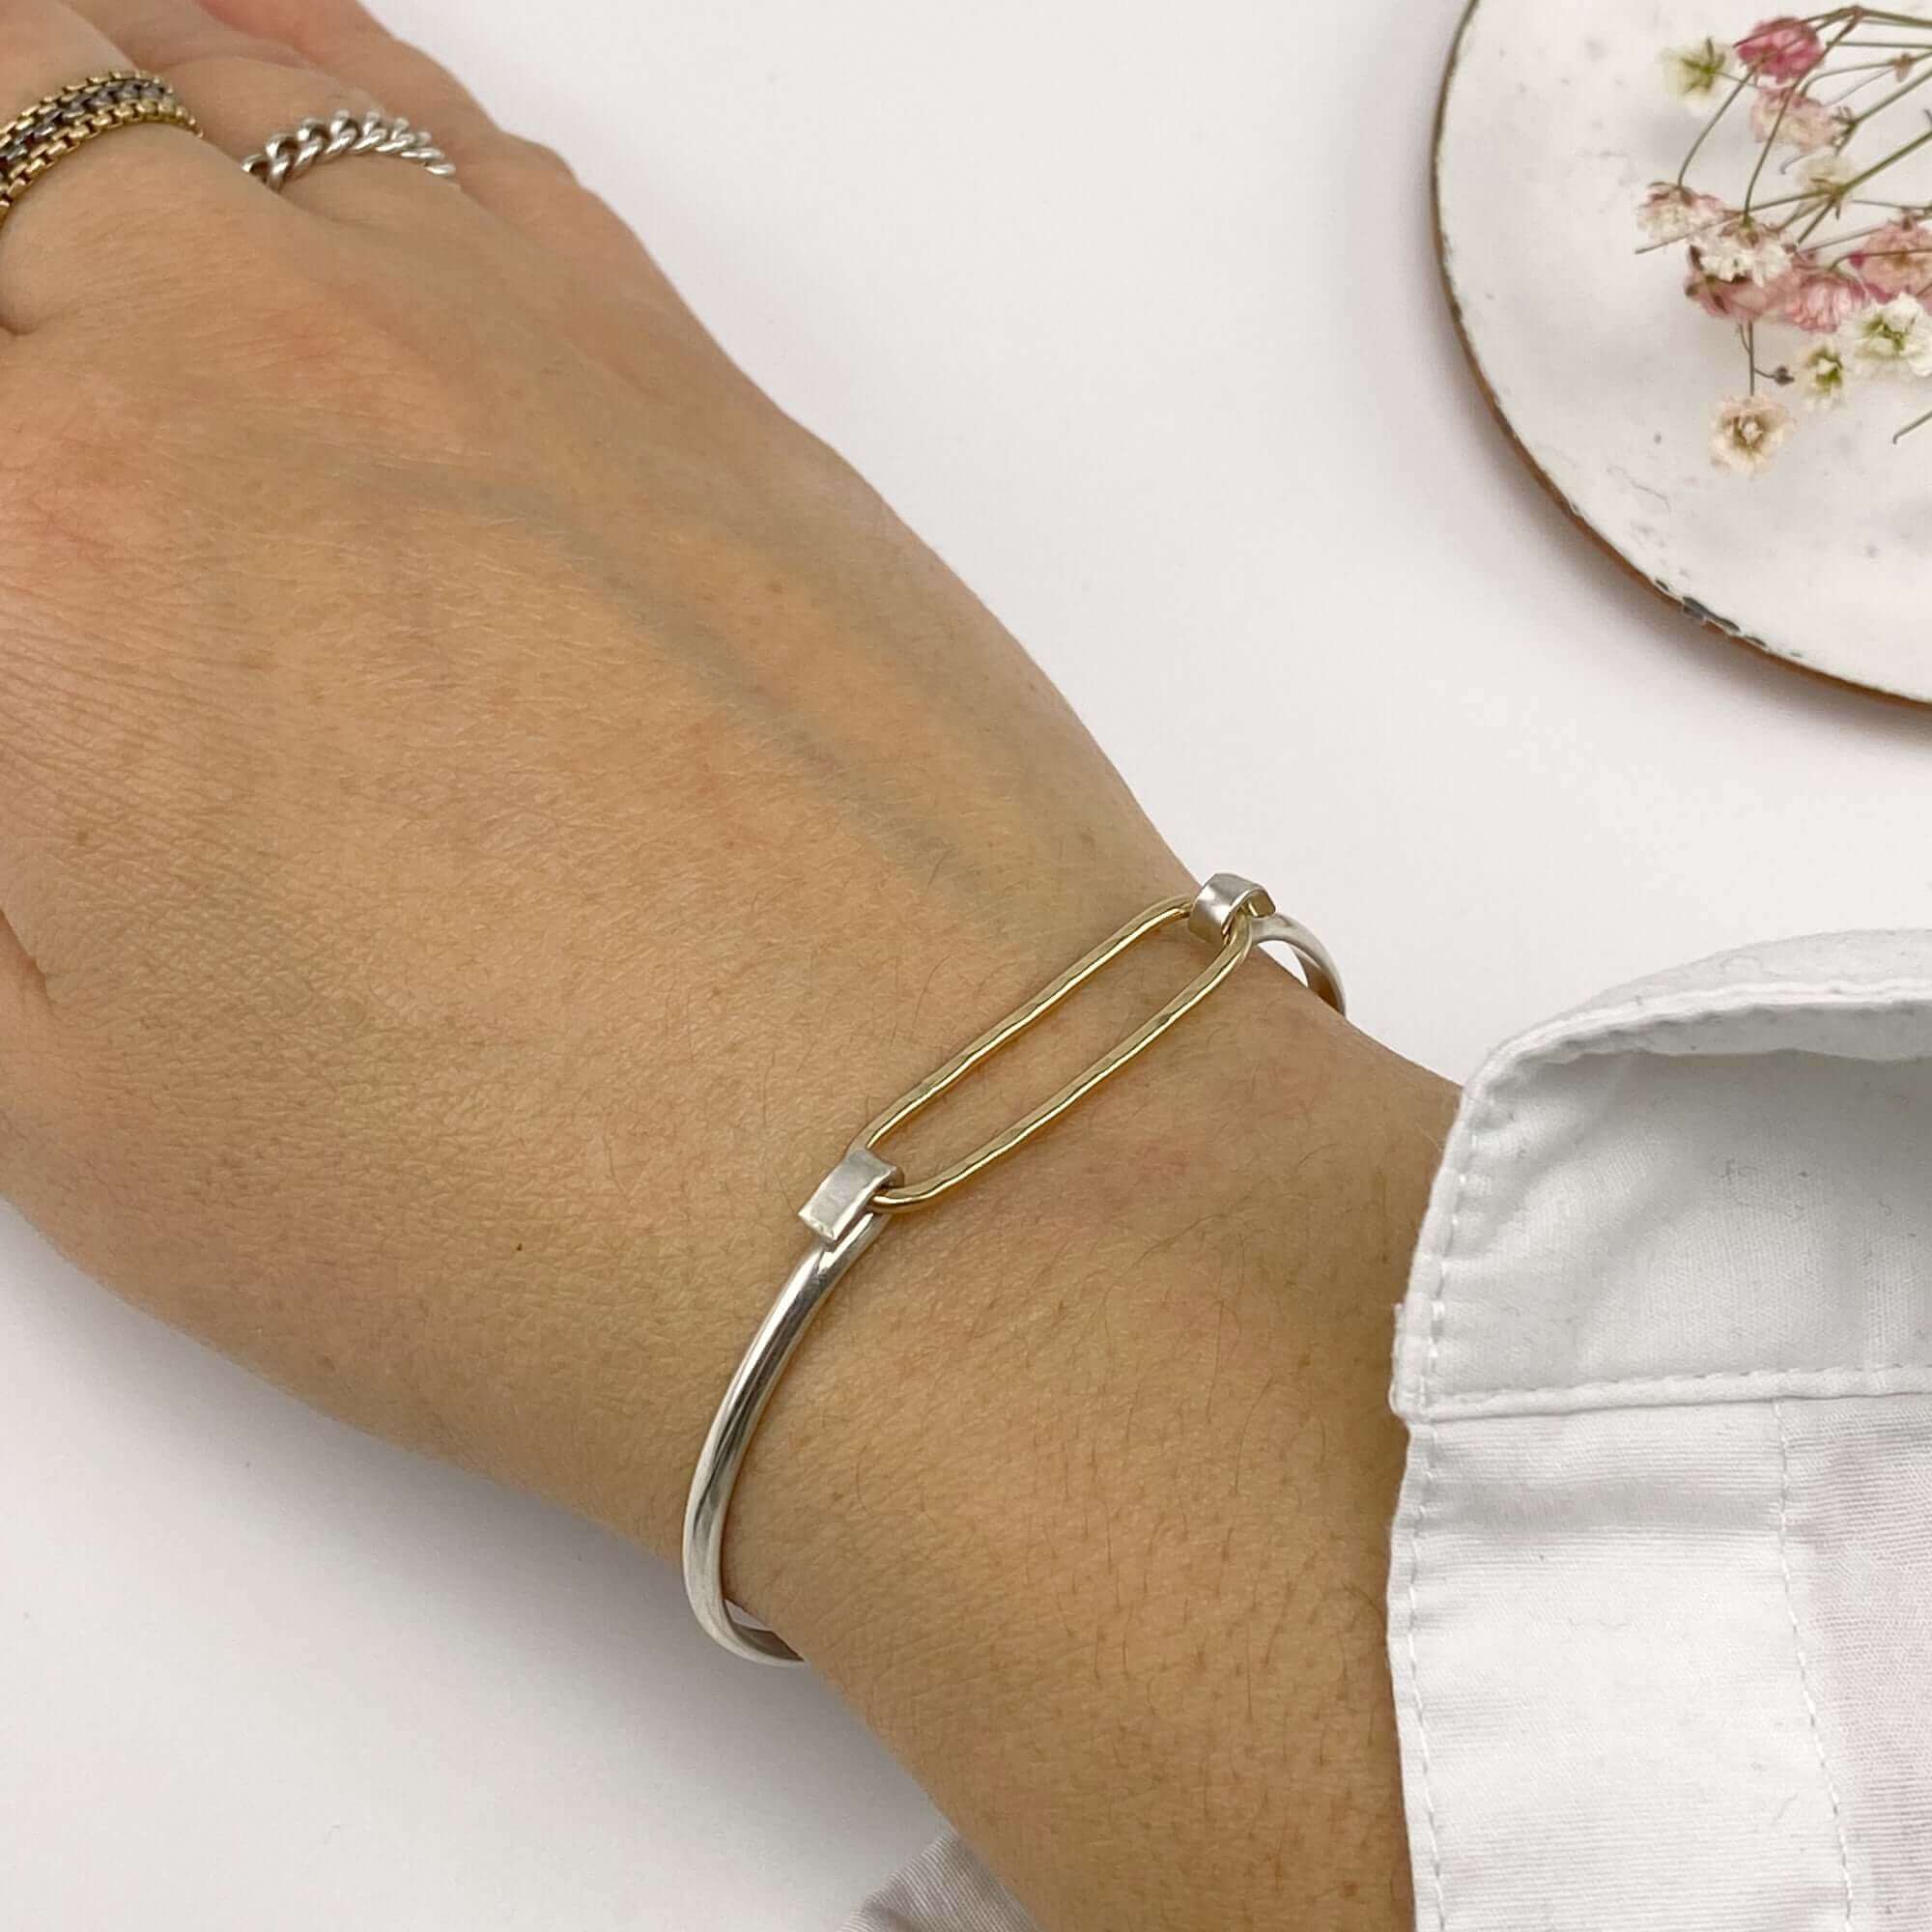 Silver Chain Bracelet Silver Plated or Sterling Silver Bracelet, Dainty  Bracelet, Basic Chain Silver Bracelet, Minimalist Simple Bracelet - Etsy